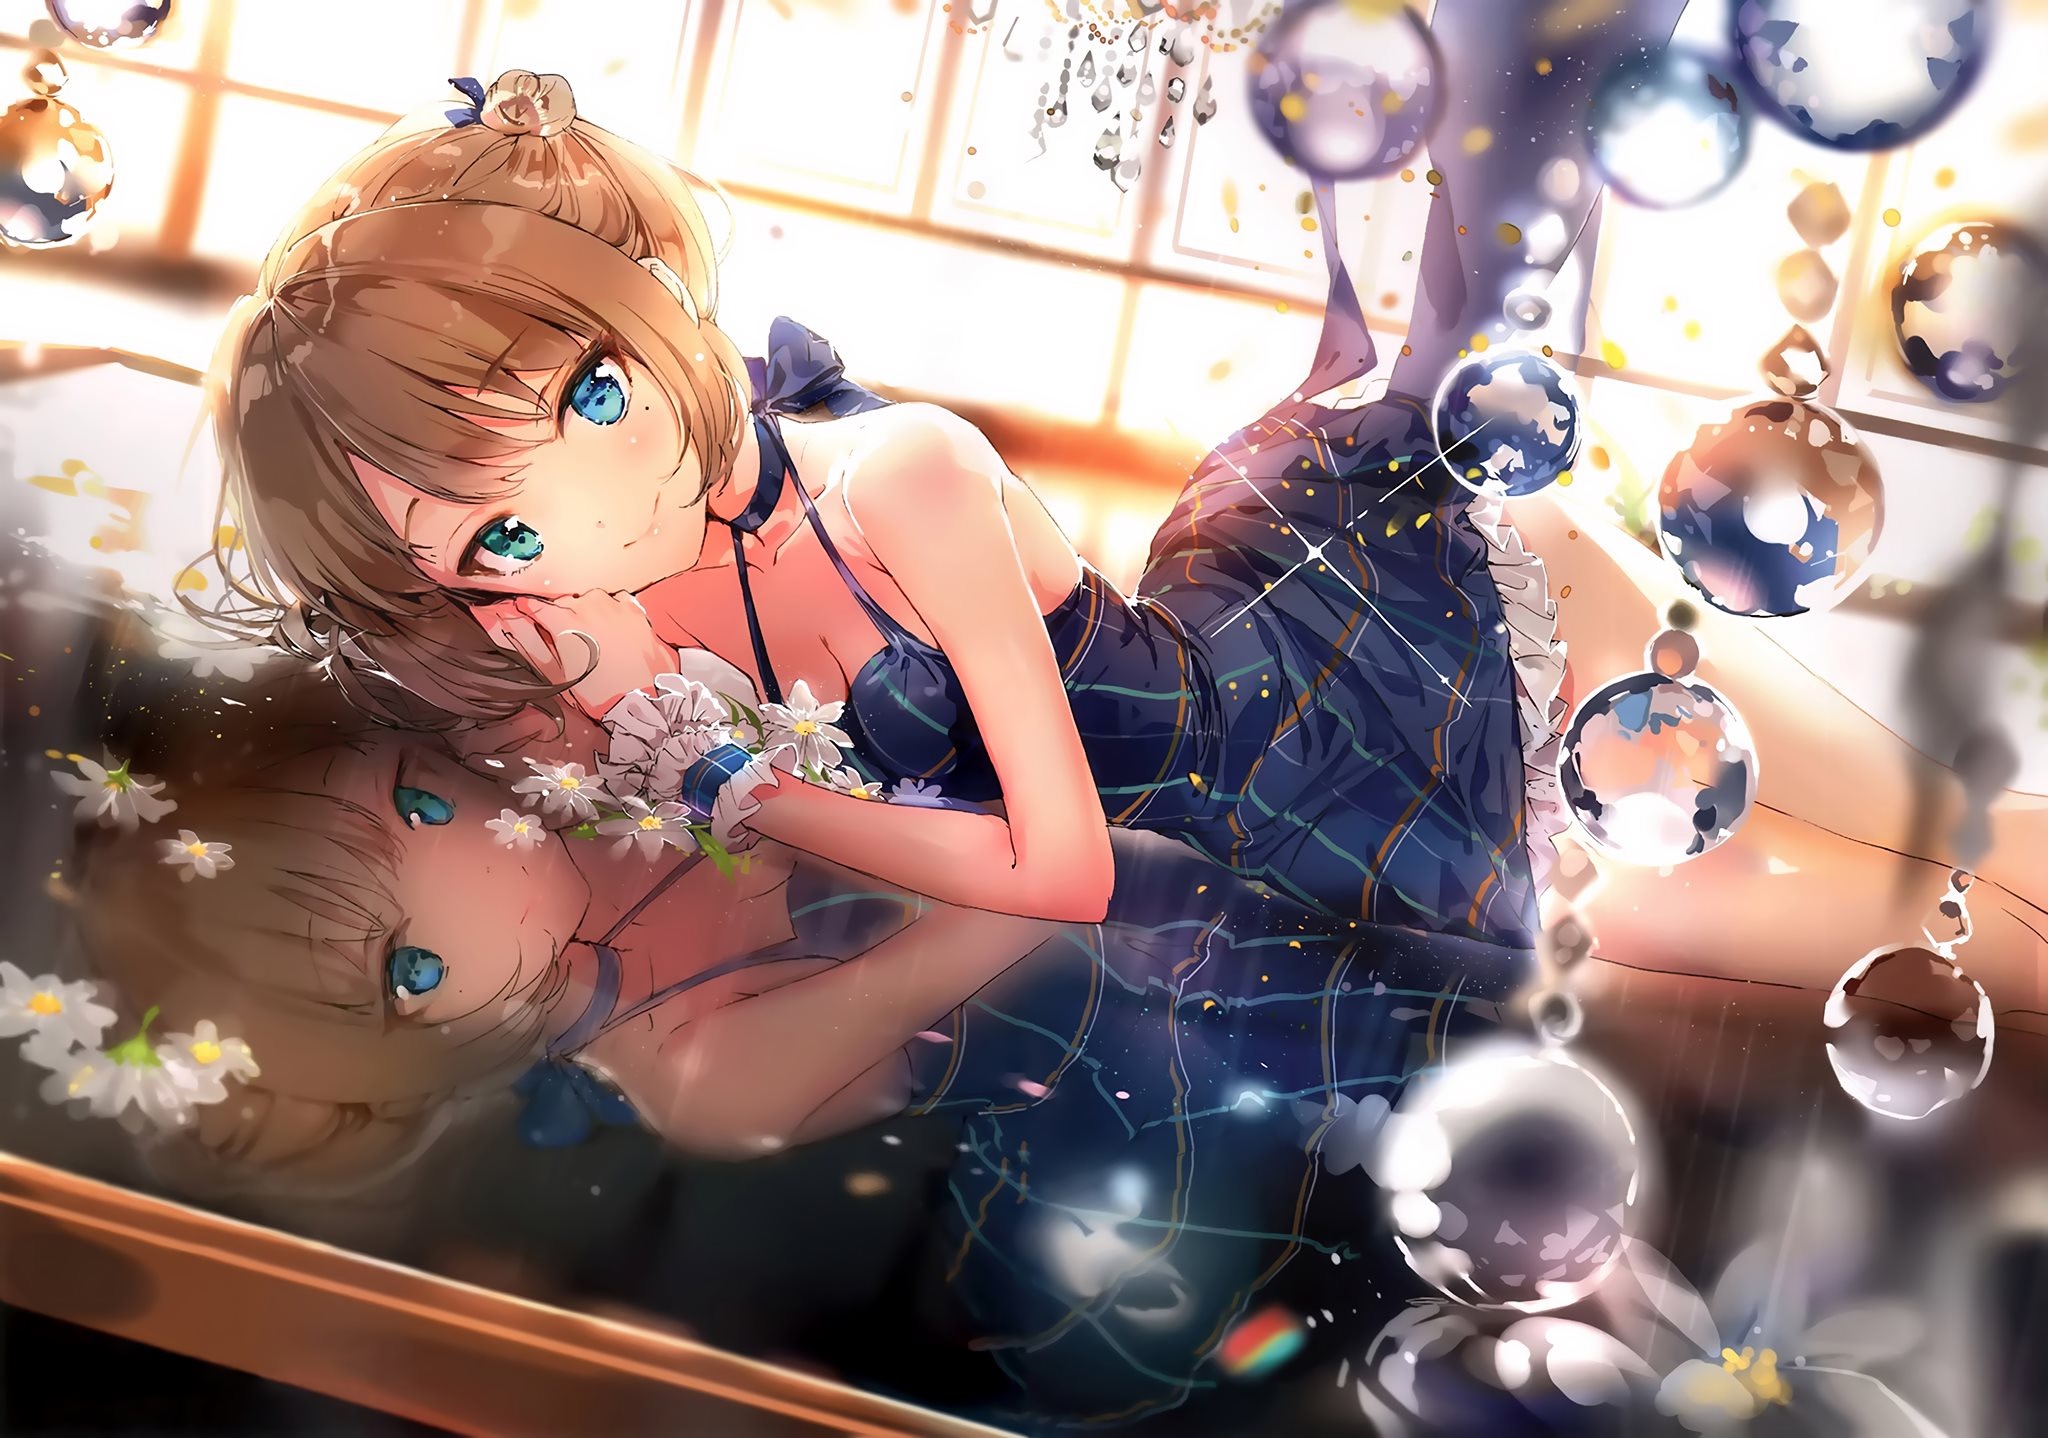 The iDOLM@STER Cinderella Girls Picture